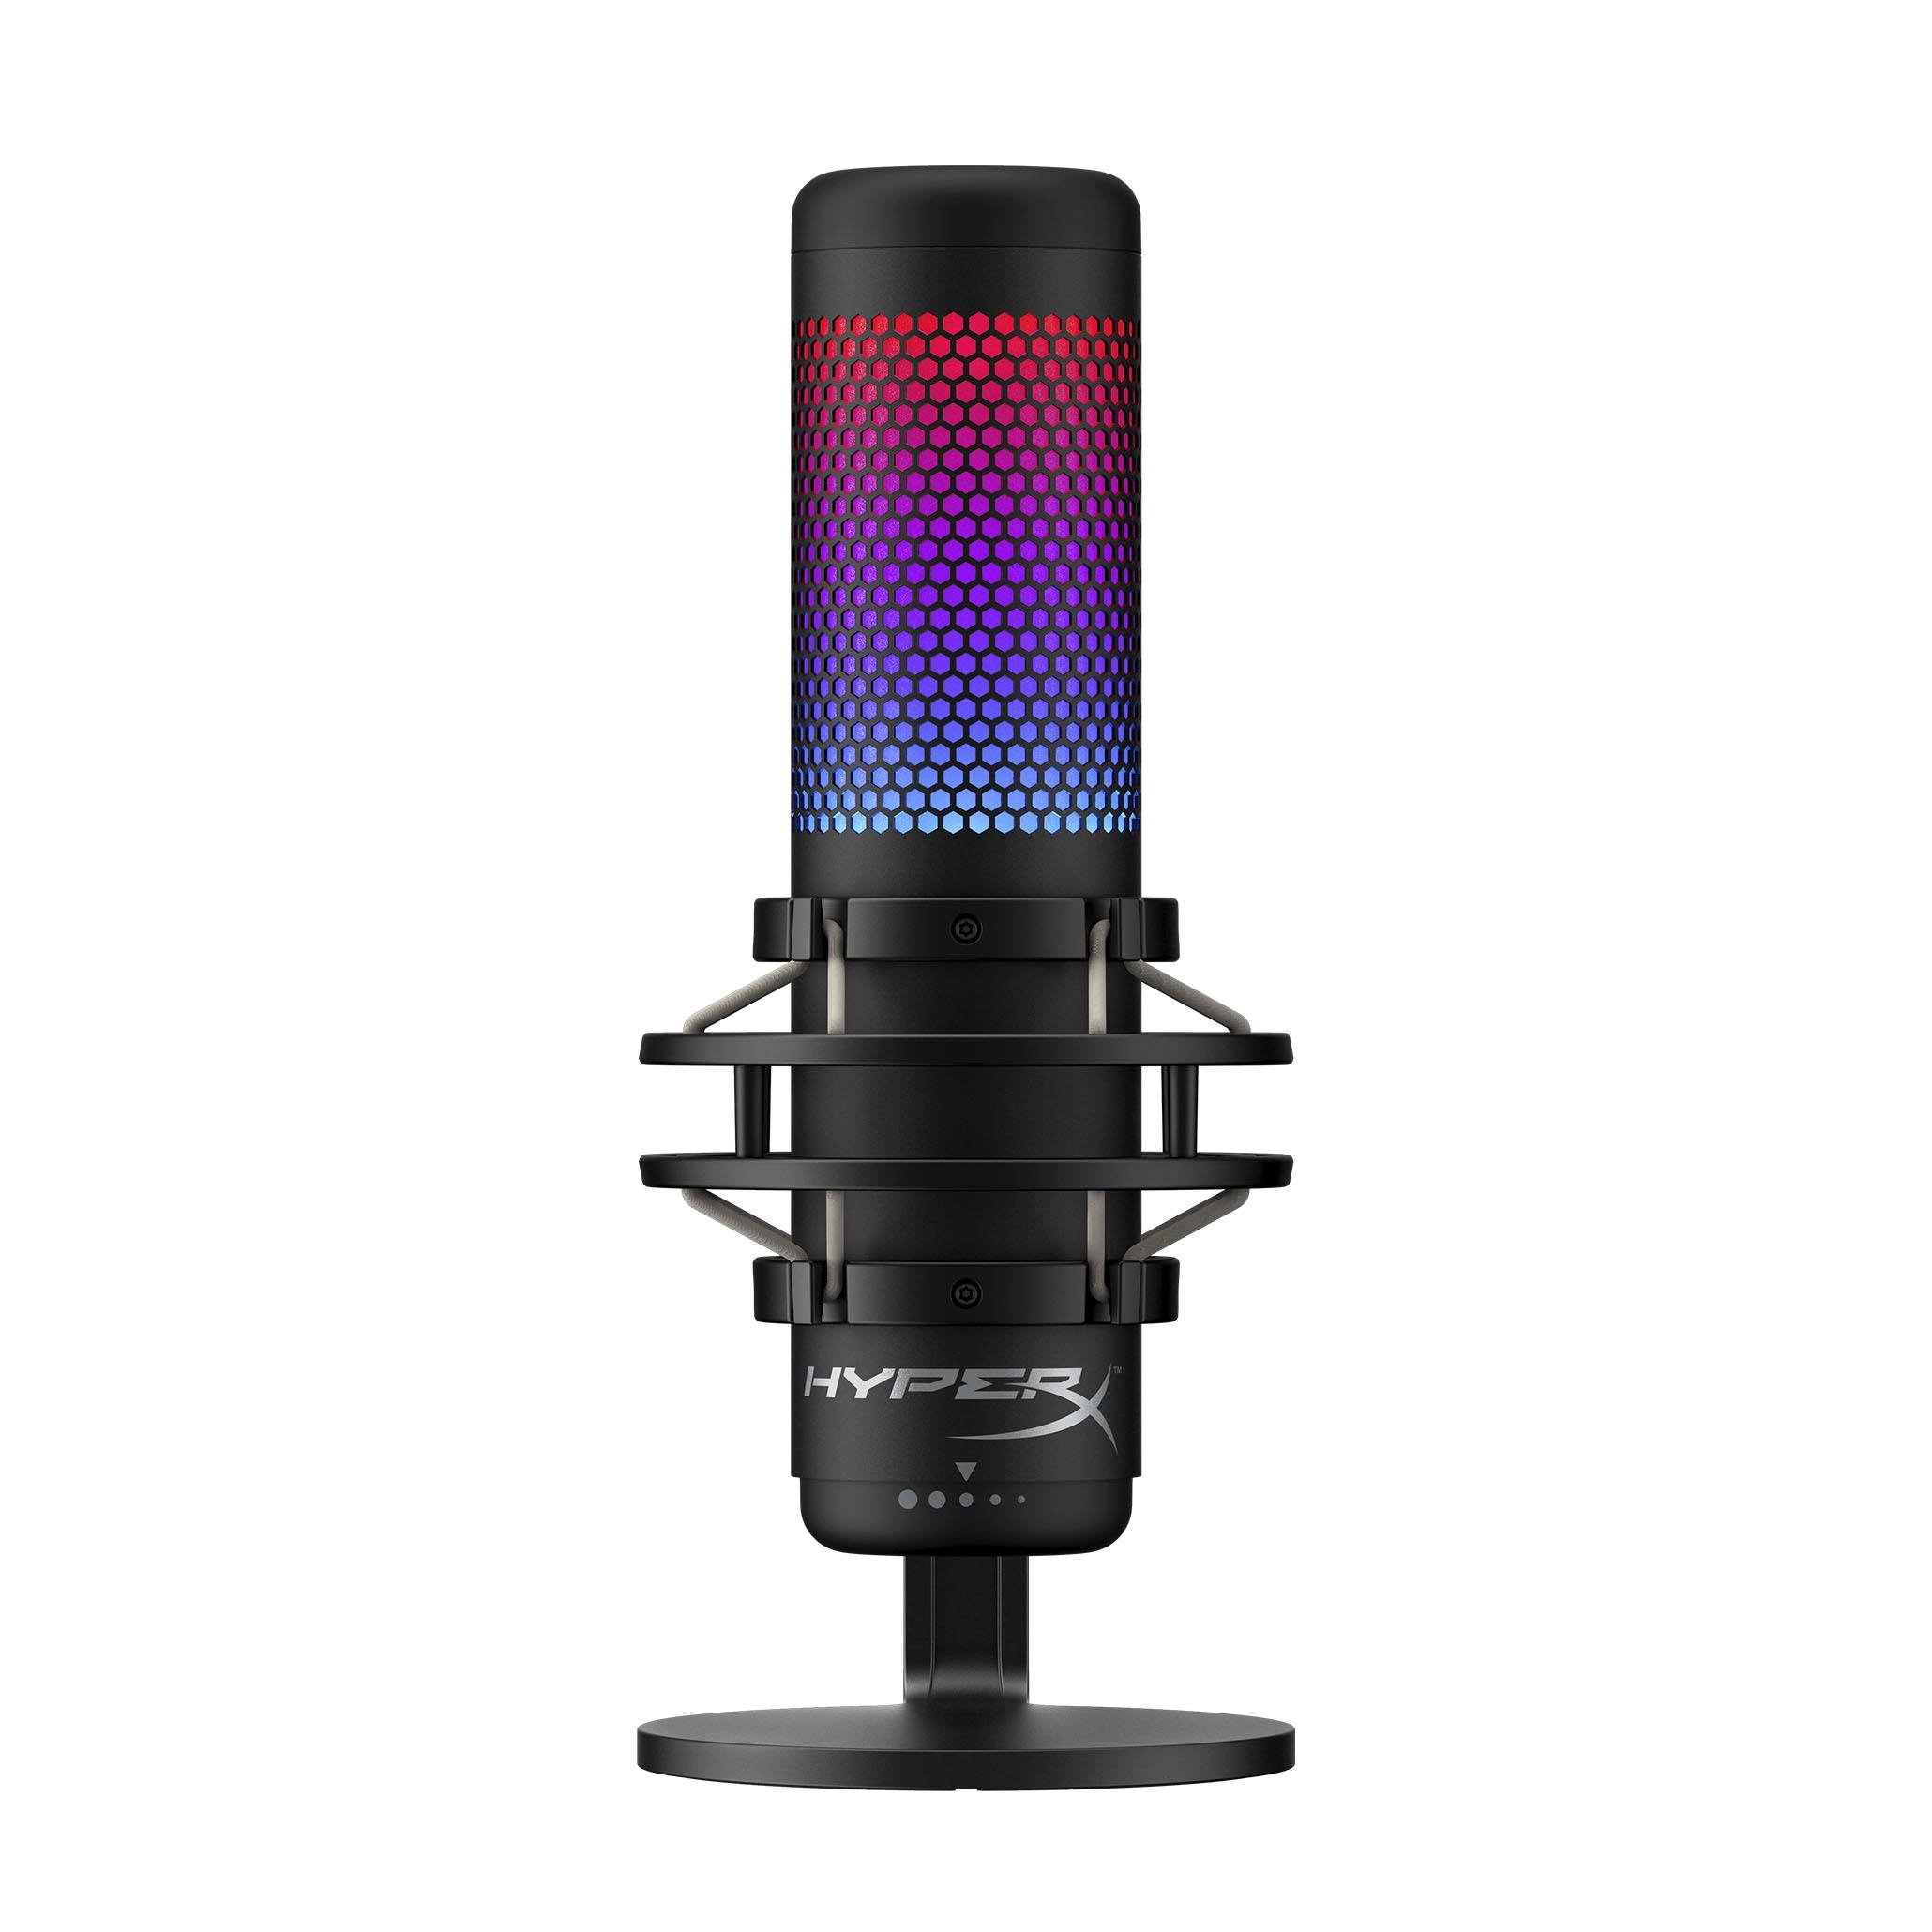 HyperX QuadCast S, RGB Microphone for the streaming, Anti-Vibration shock mount, Tap-to-Mute sensor with LED indicator, Four selectable polar patterns, Internal pop filter, Built-in headphone jack, Cable length: 3m, Black/Red, USB